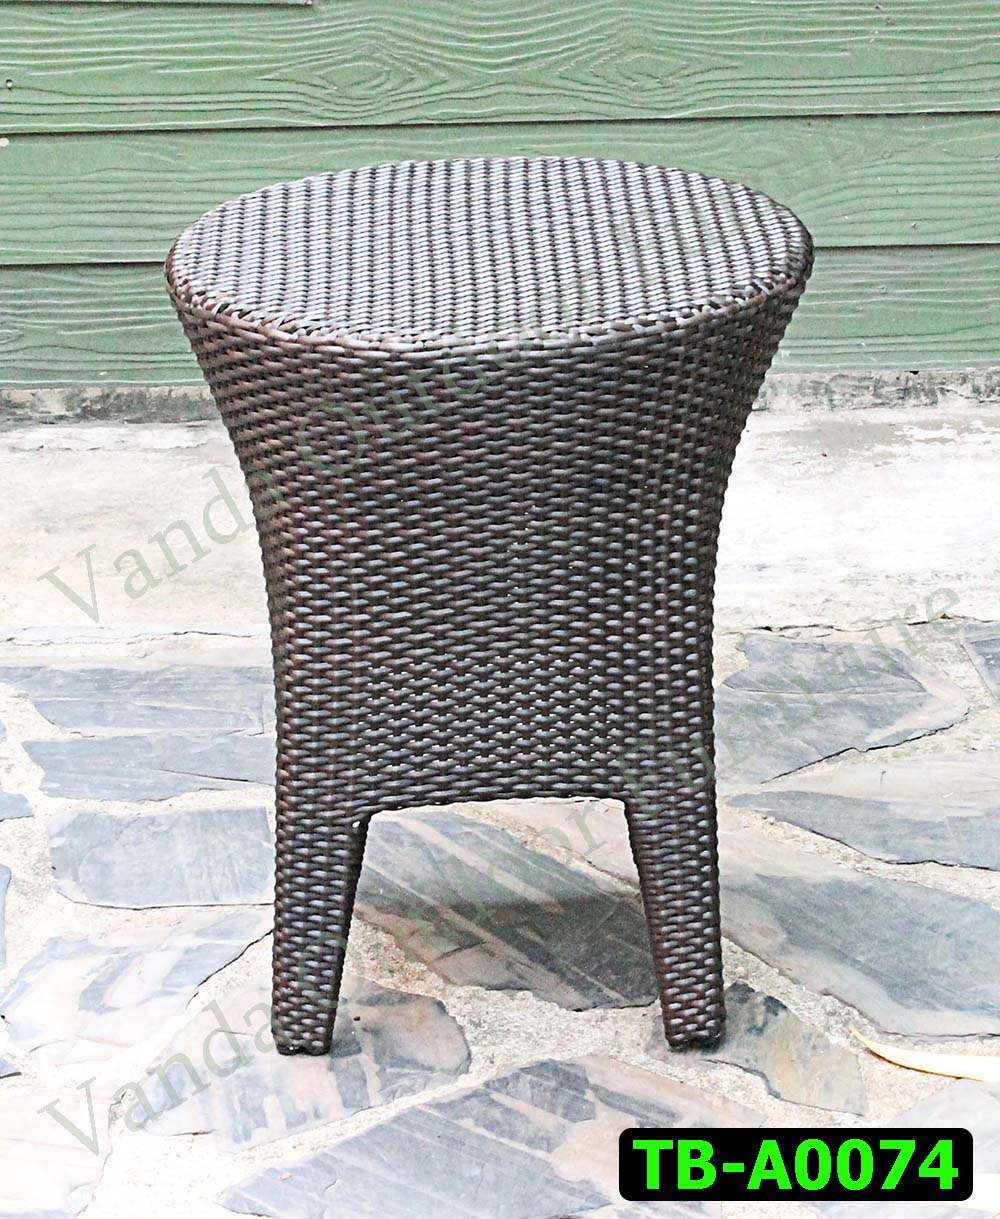 Rattan Table Product code TB-A0074